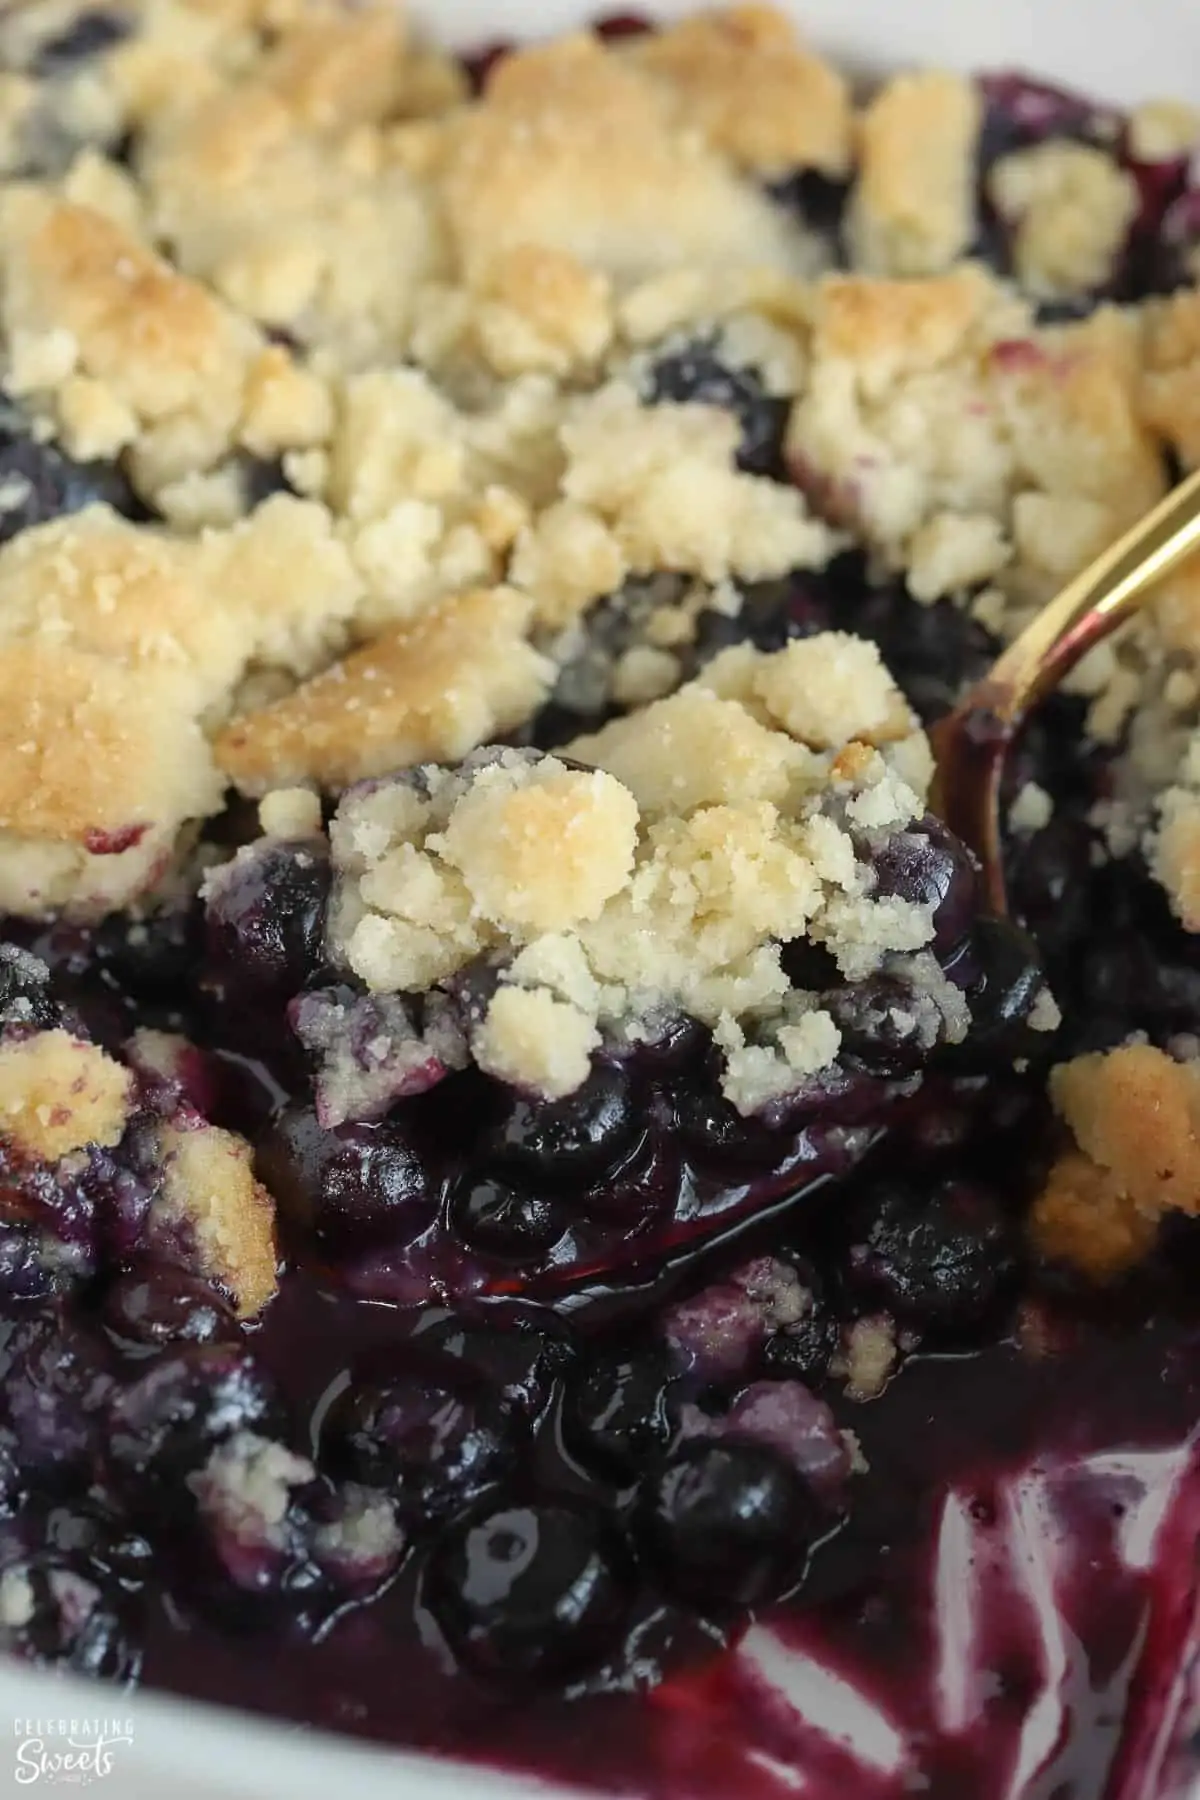 Blueberry cobbler in a white baking dish with a gold spoon.